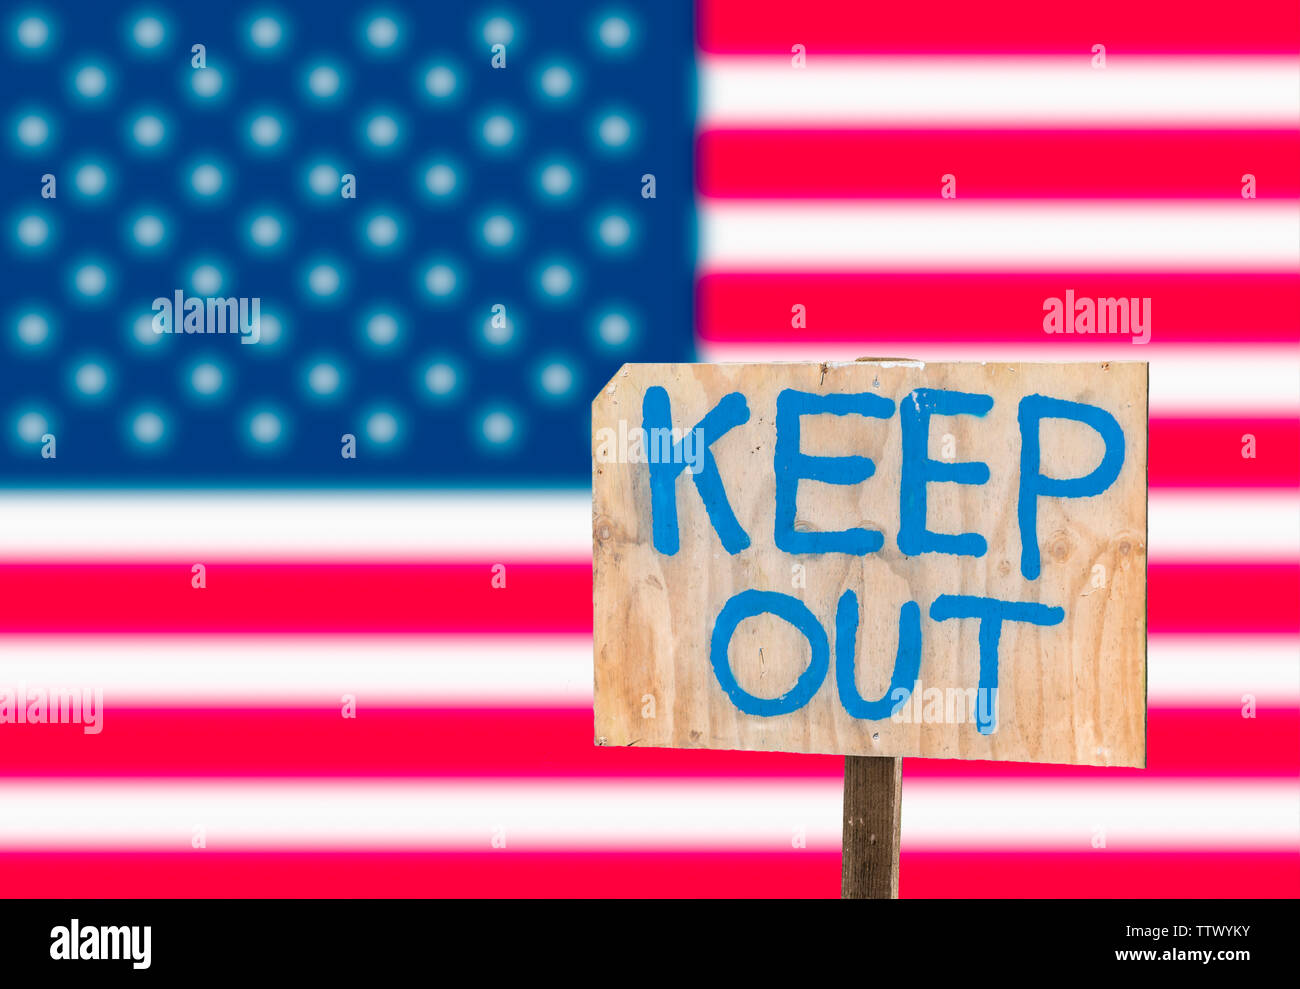 Keep out sign in front of the USA flag, to signify a closed border and the proposed wall between Mexico and the USA. Stock Photo